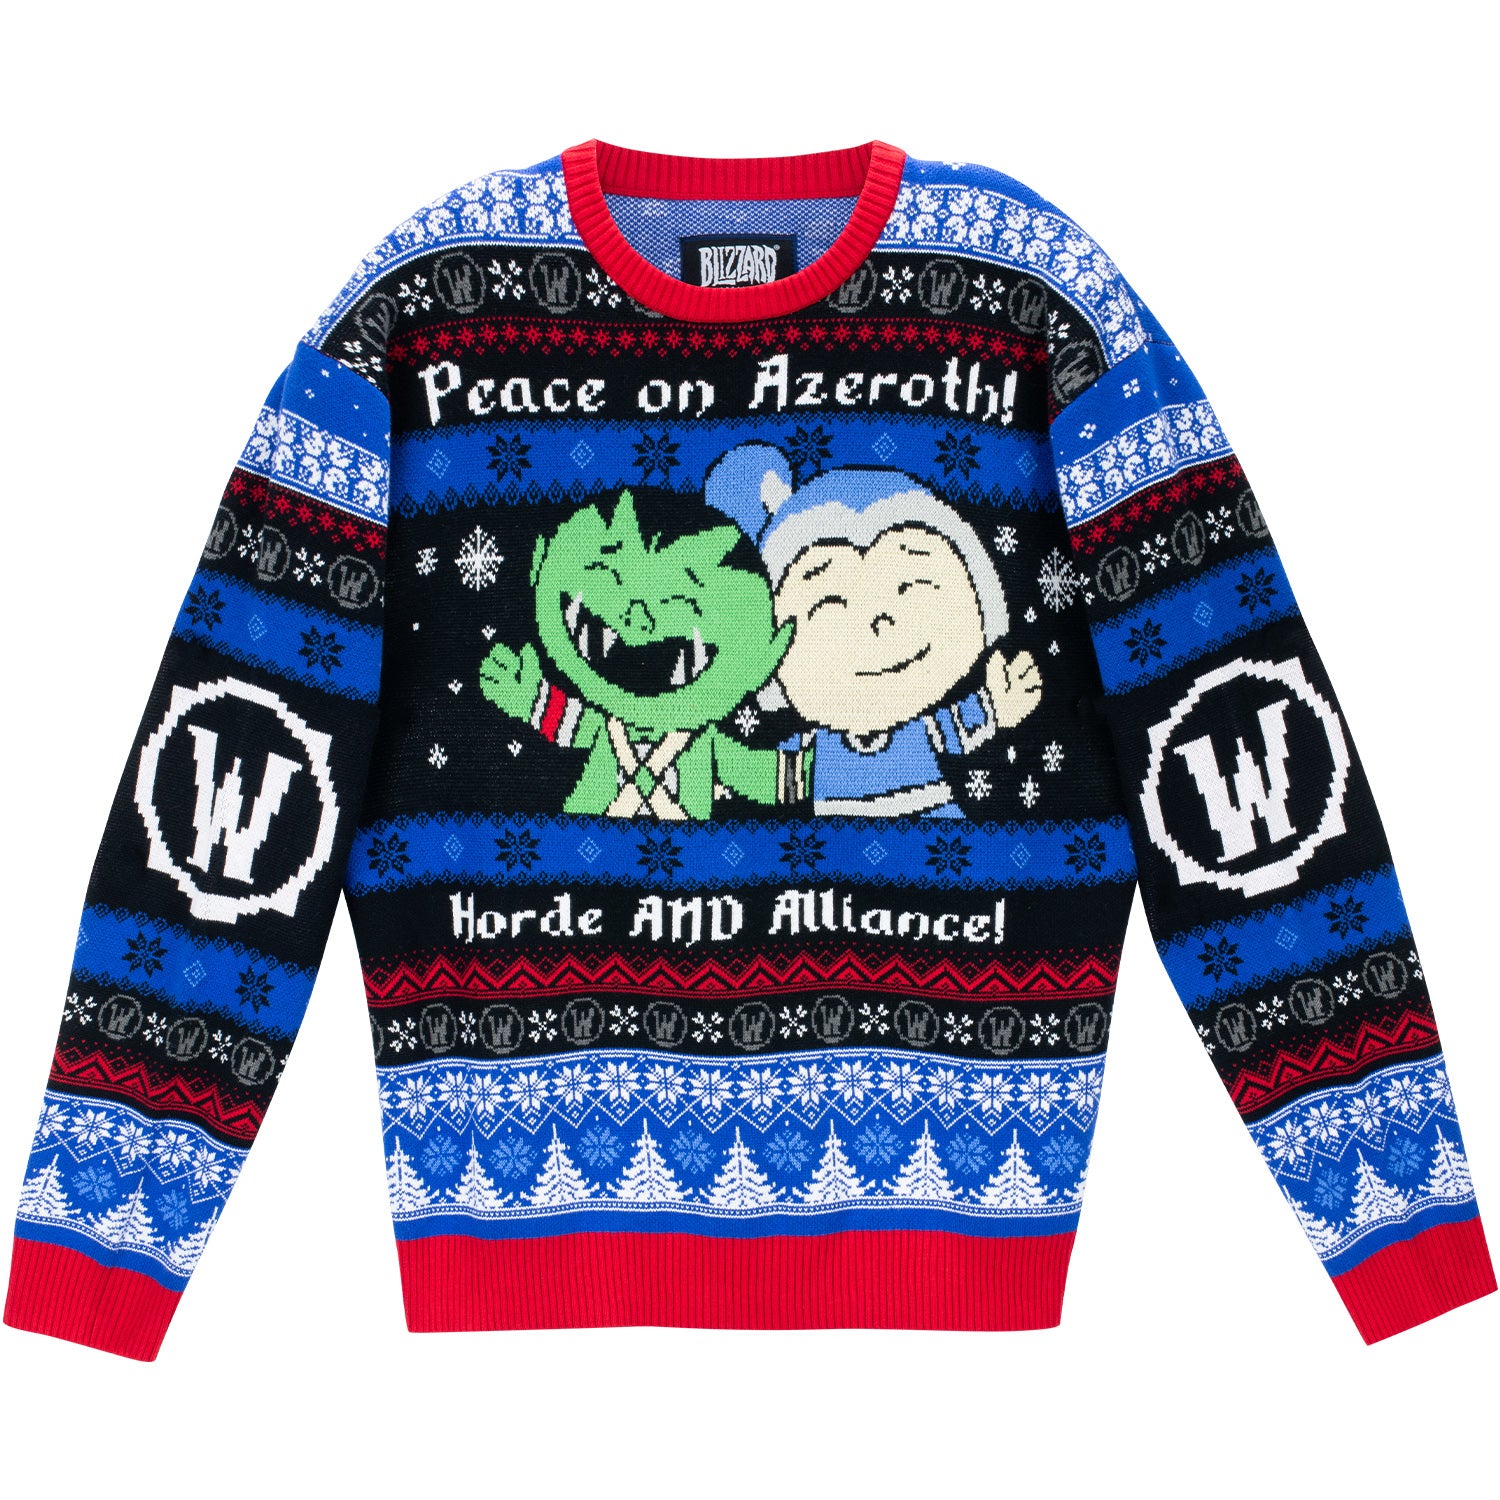 World of Warcraft Peace on Azeroth Holiday Sweater - Front View